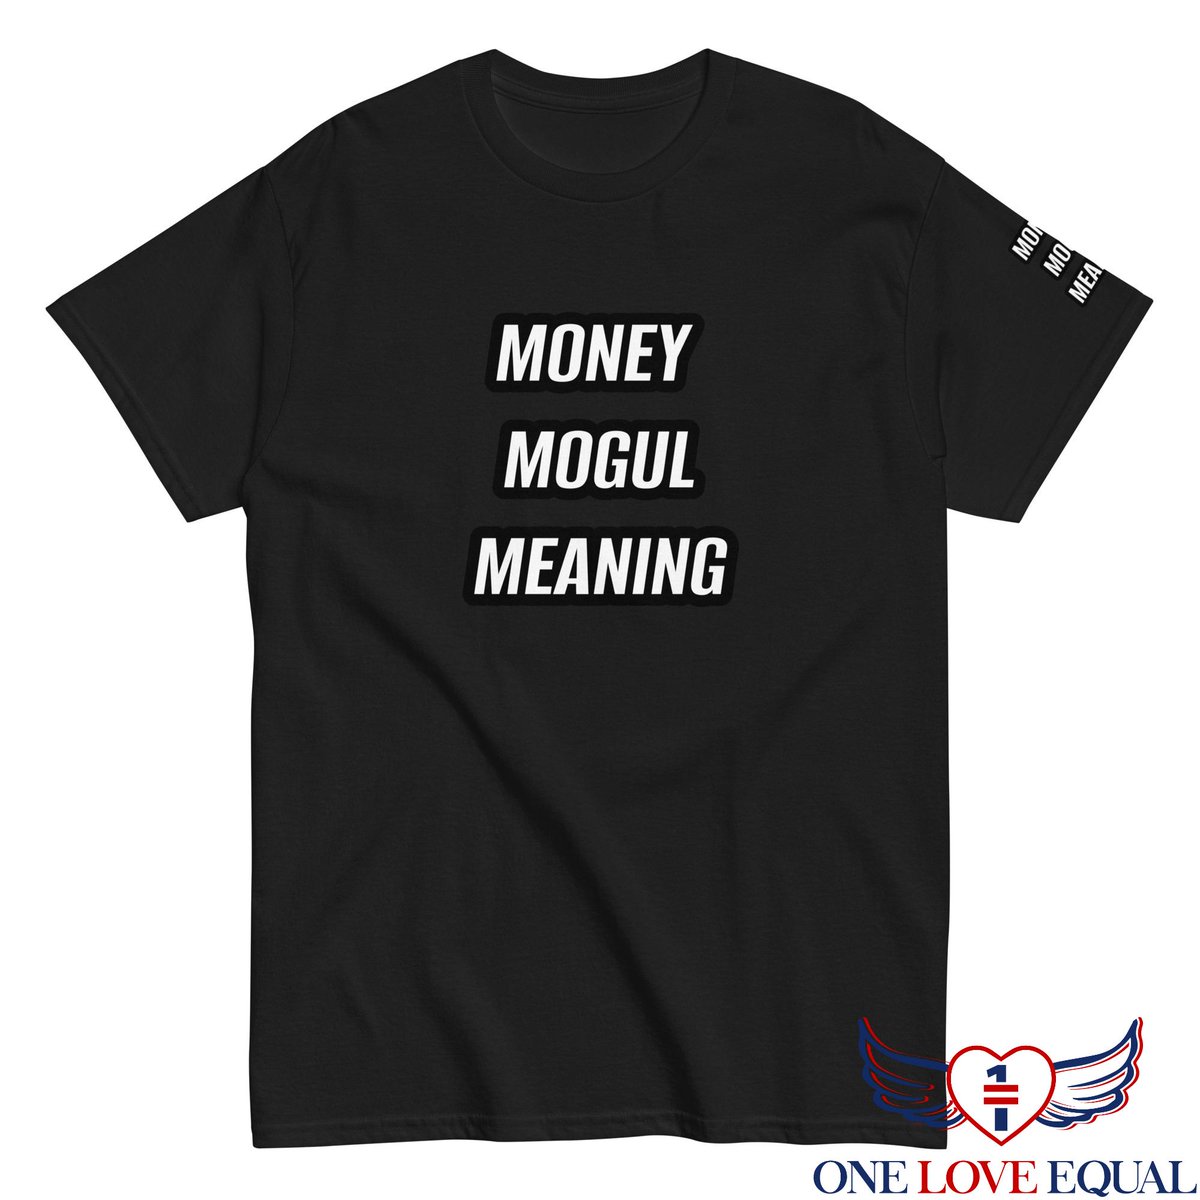 oneloveequal.com/product/money-…
MONEY MOGUL MEANING Men’s classic tee
$22.00 – $31.50
 Join the movement for One Love Equal and spread the message of peace on earth. Together, we can make a difference. #OneLoveEqual #PeaceOnEarth #SpreadLove #supportingoneloveequal